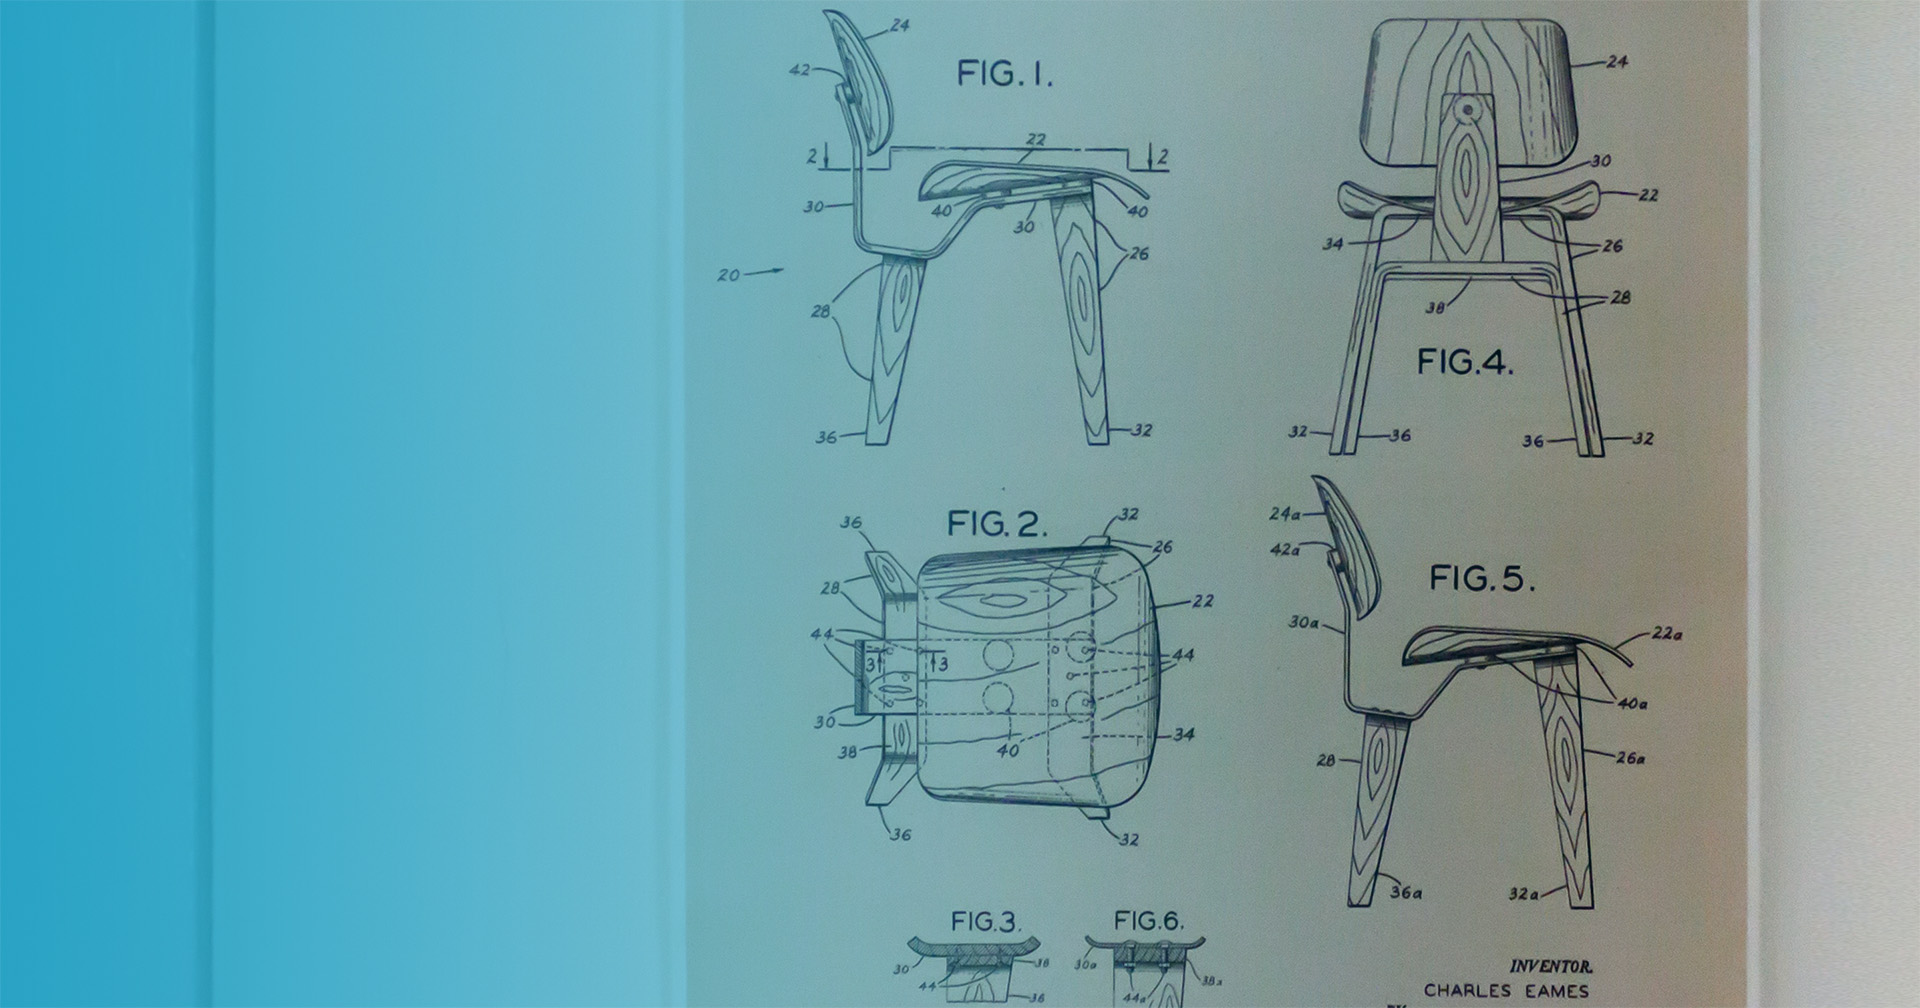 Patent for Eames lounge chair